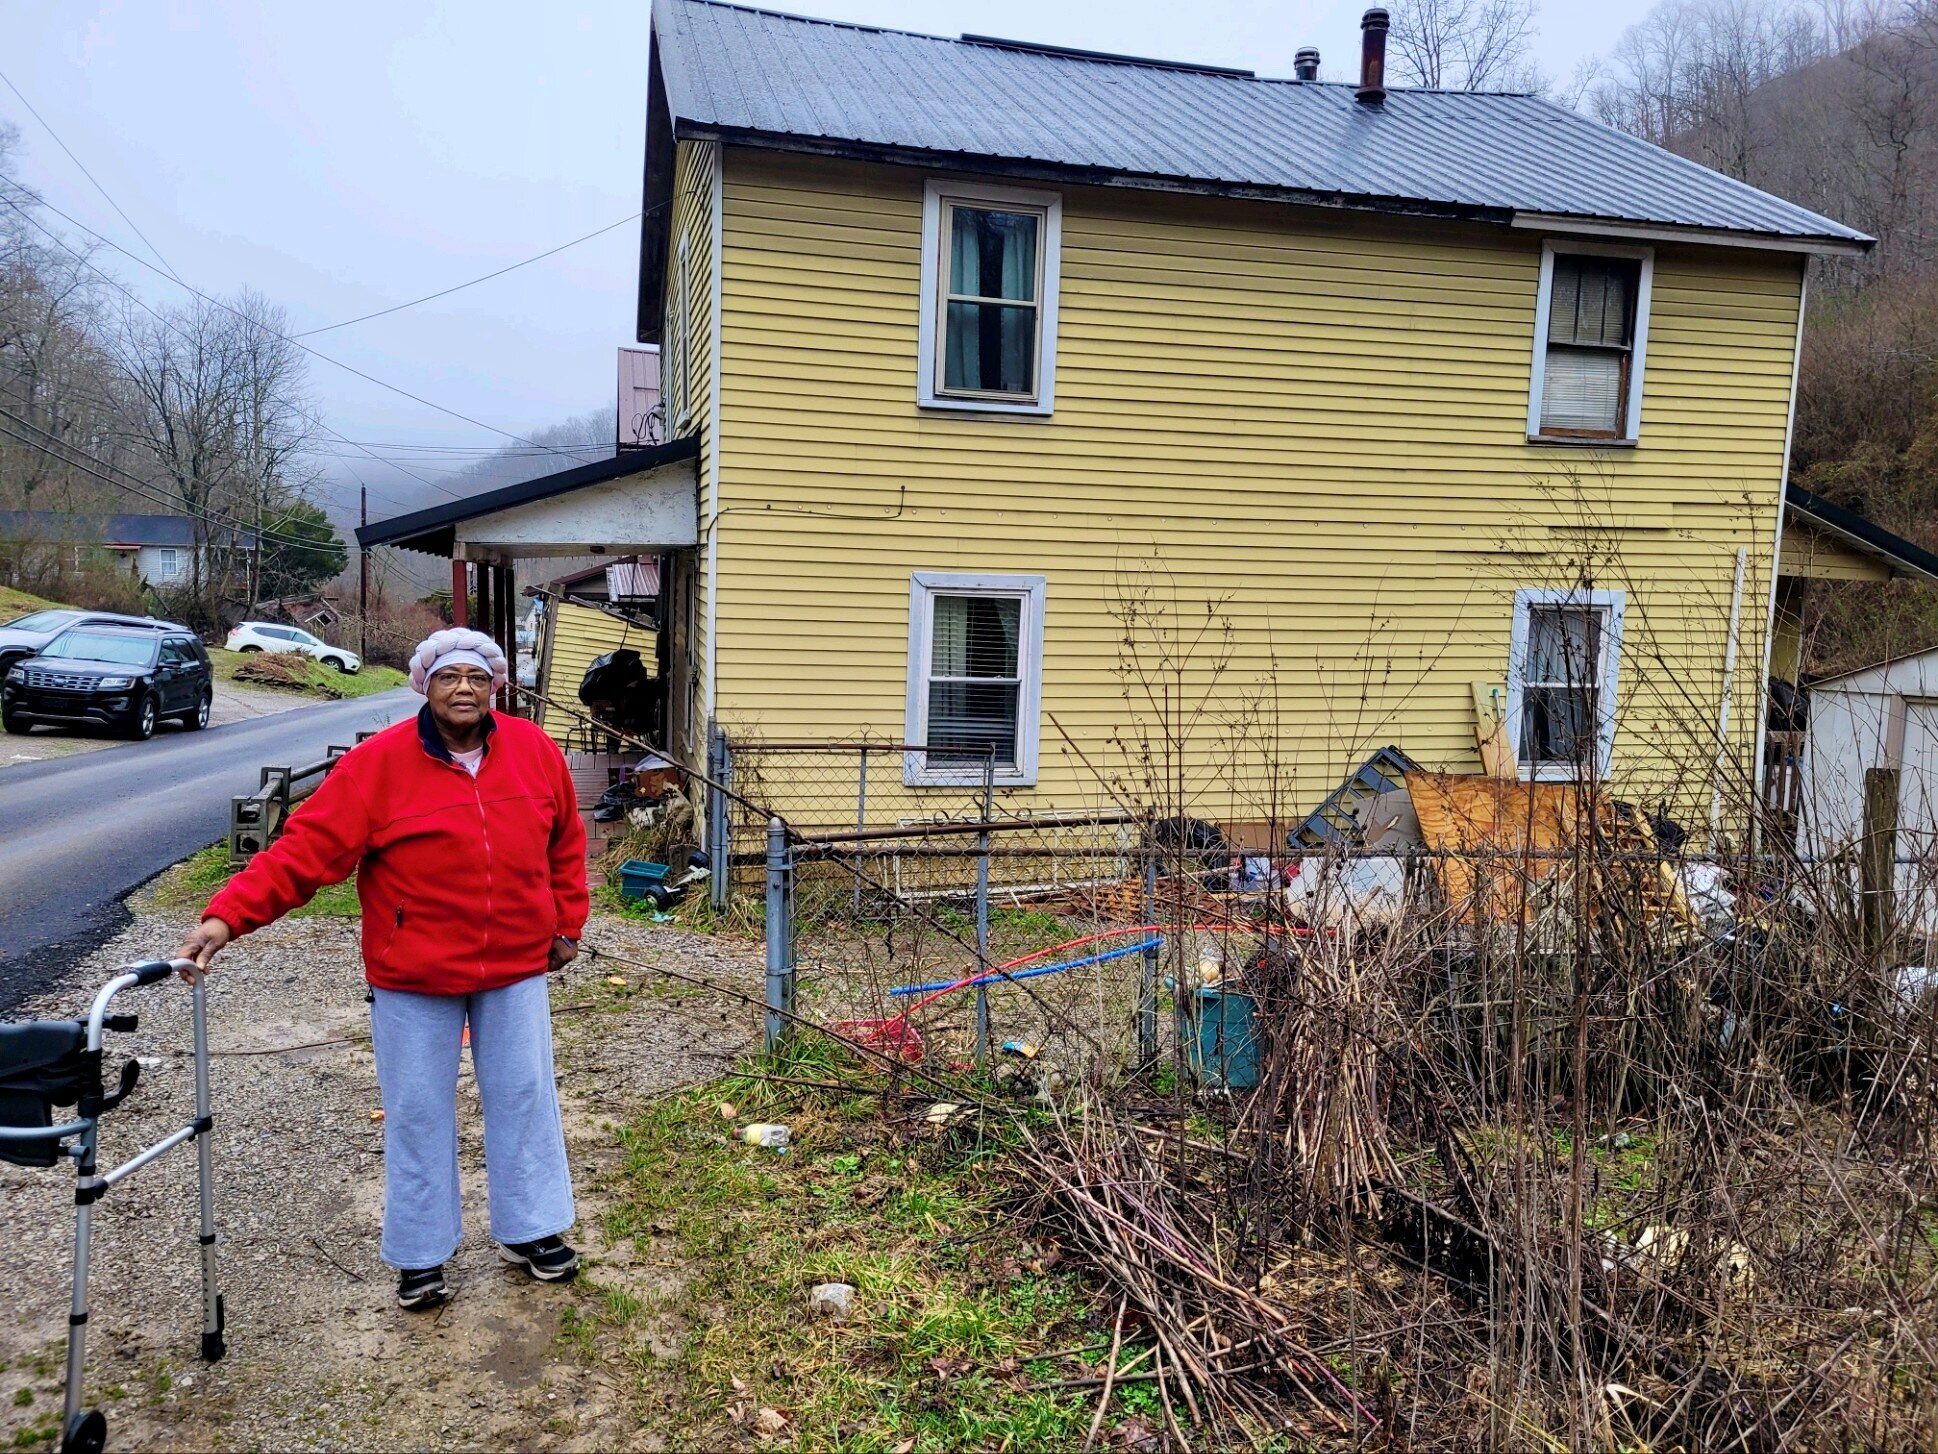 Lois Thompson stands outside her old house